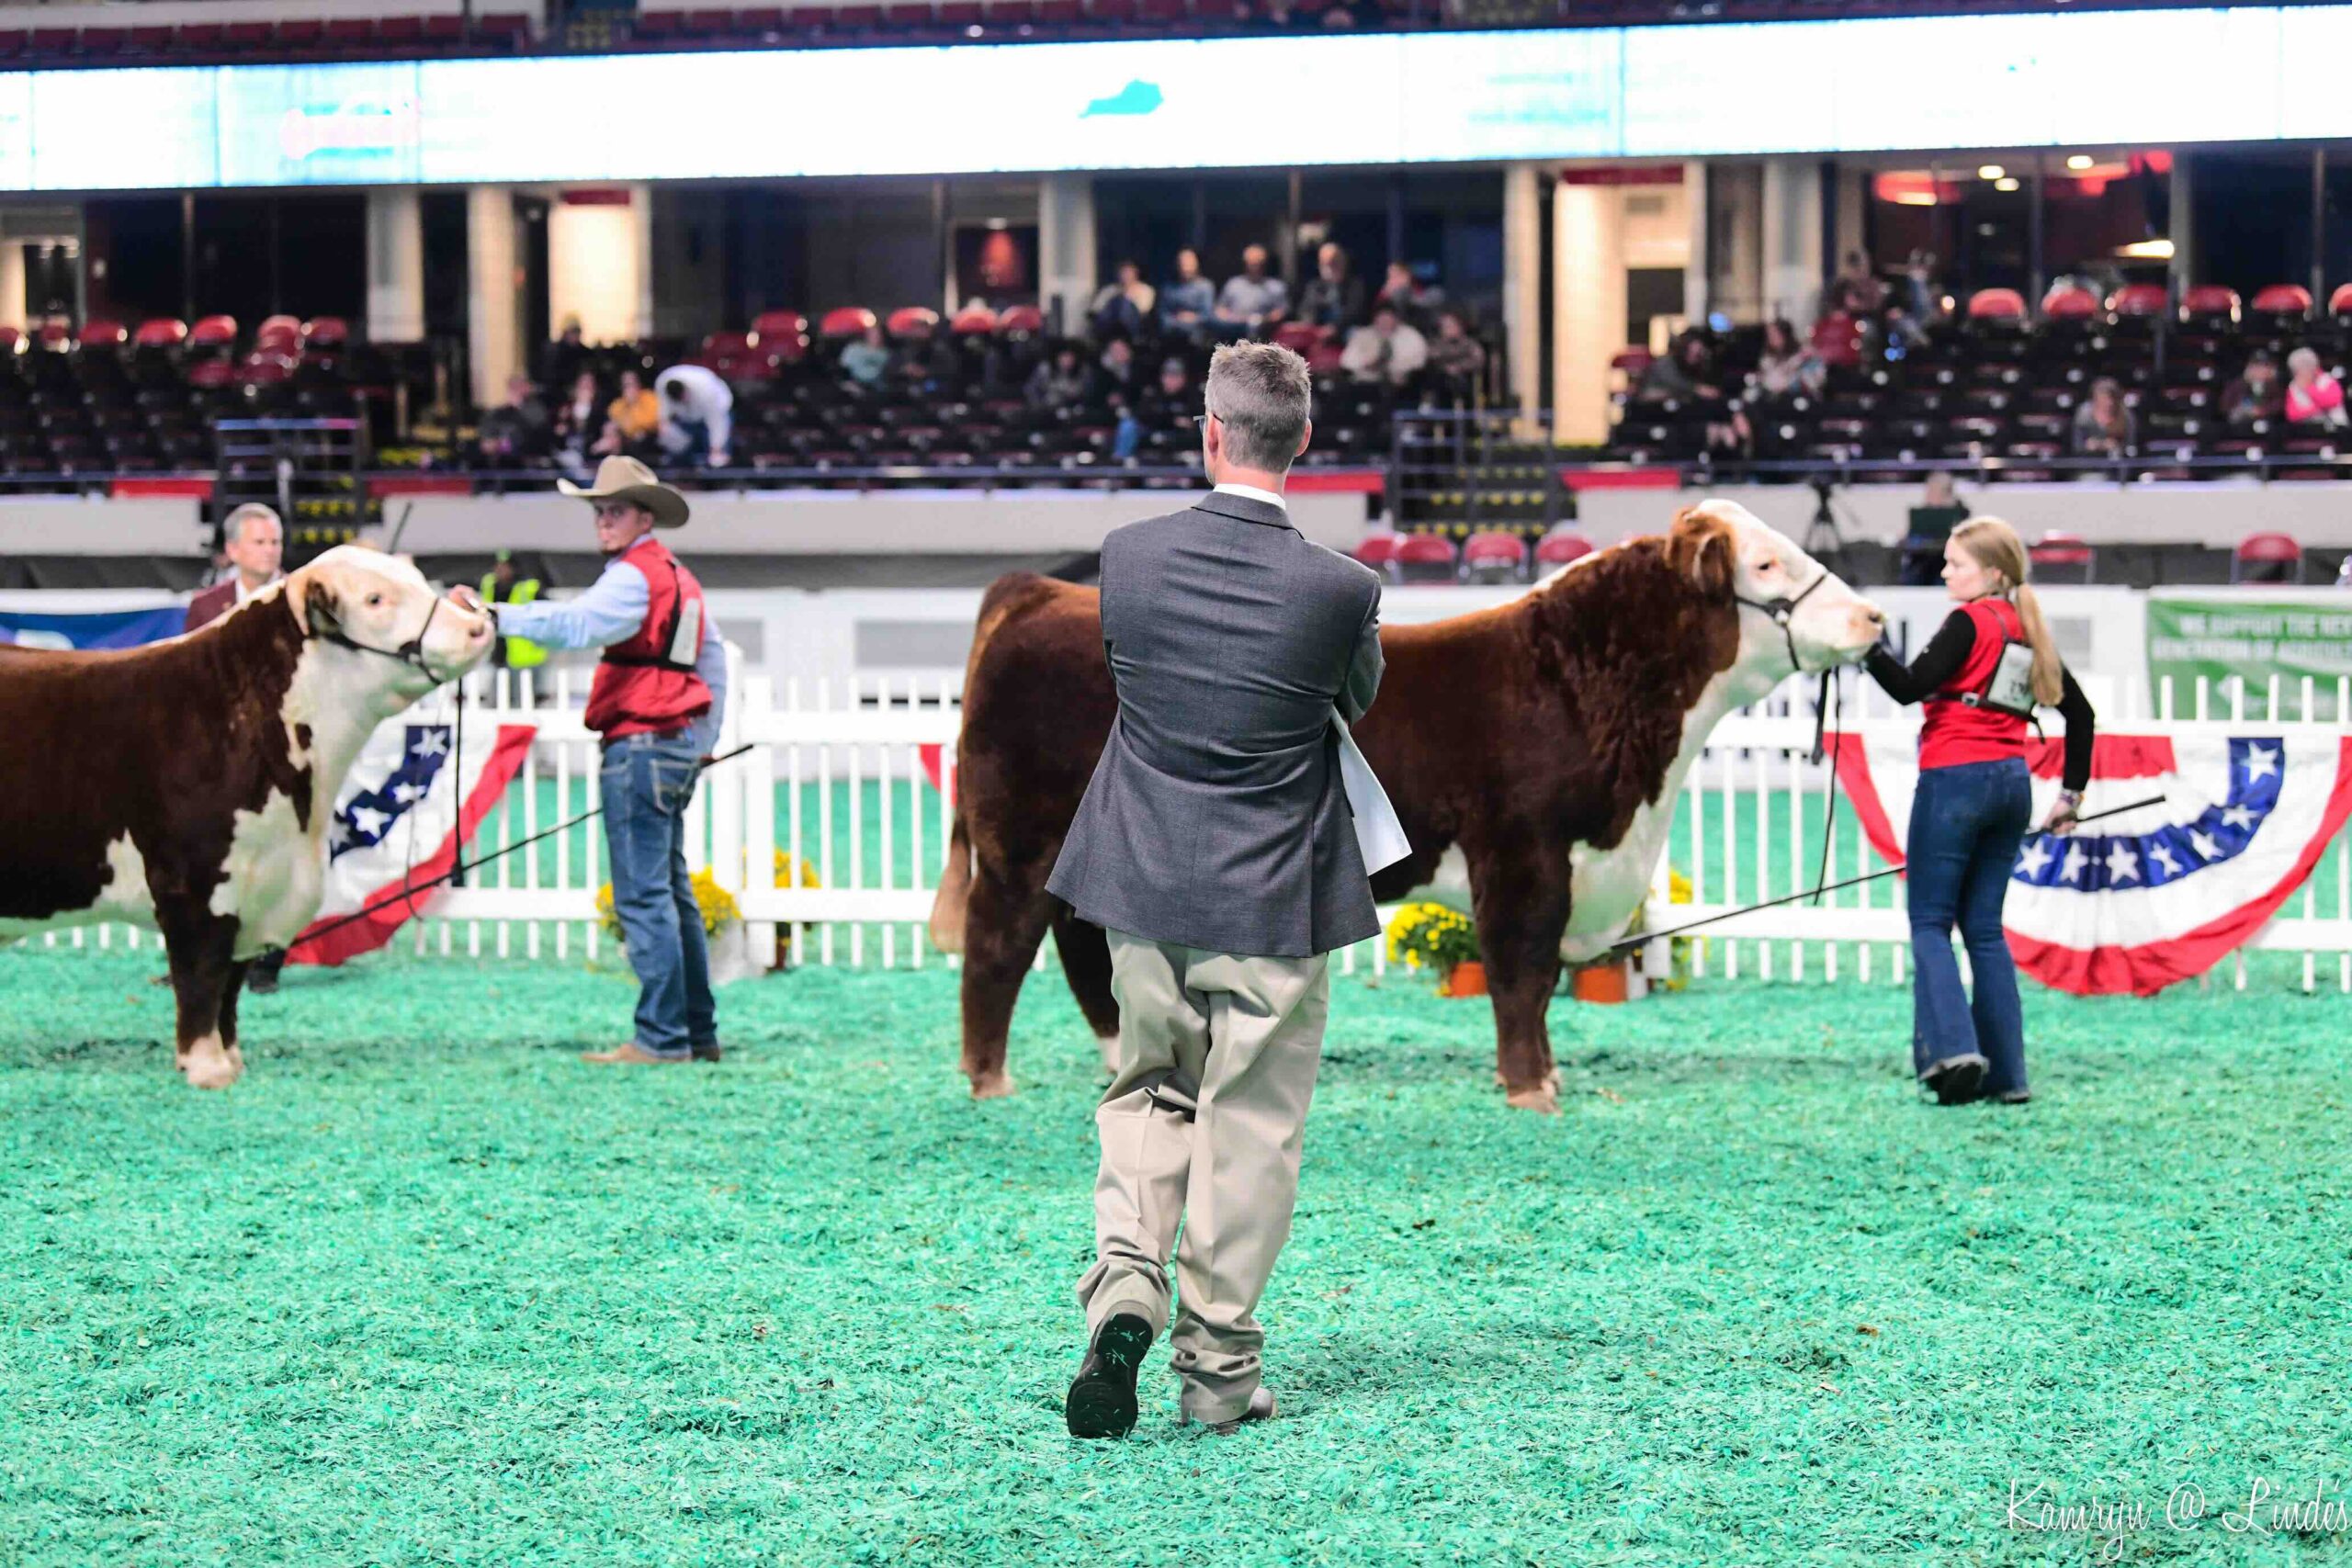 Judge examining baldy cows during show